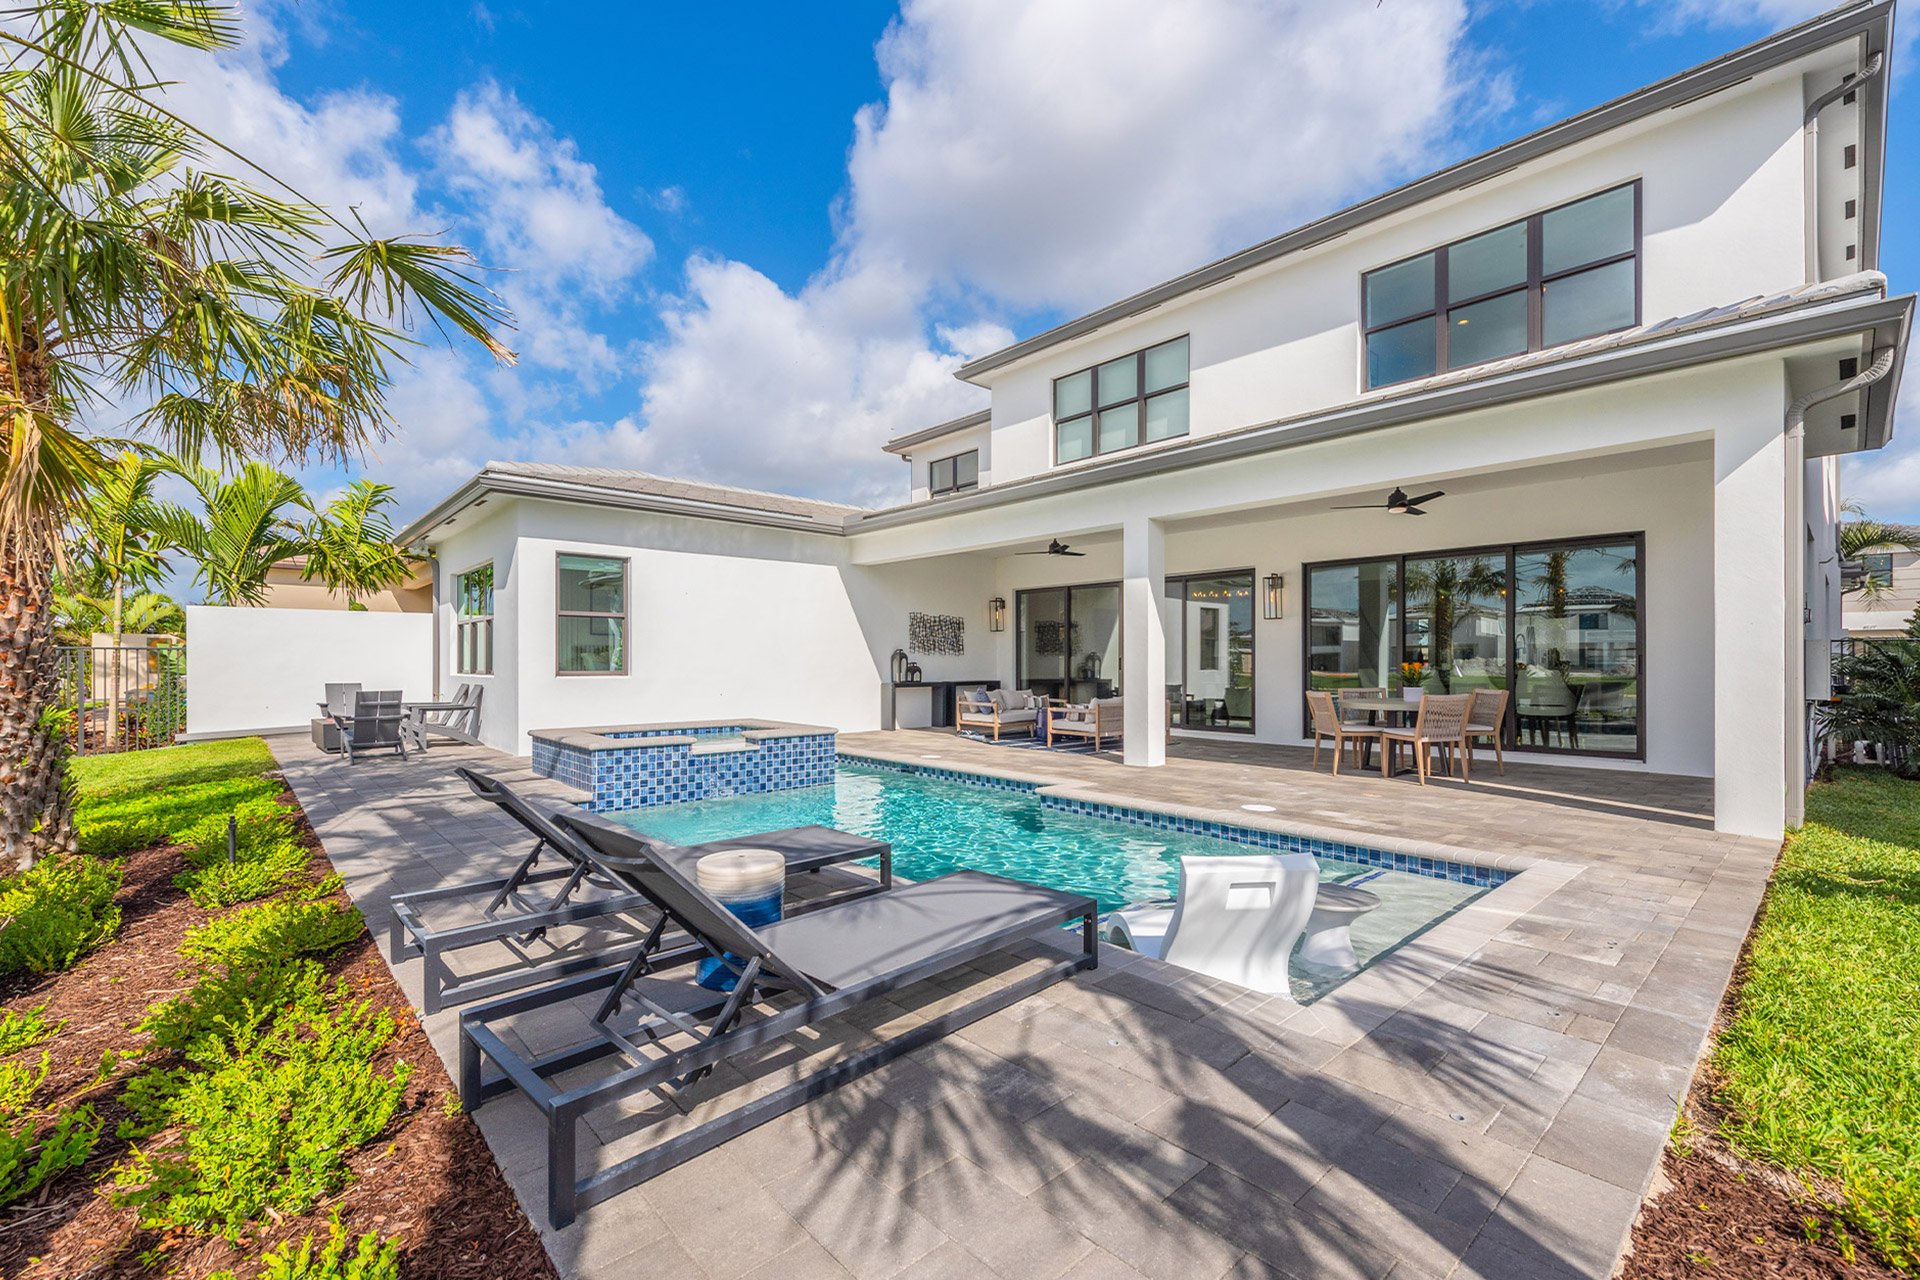 Modern luxury backyard with swimming pool and outdoor living space at Lotus Edge, Boca Raton, showcasing Itchko Ezratti’s GL Homes development with high-end finishes and tropical landscaping.